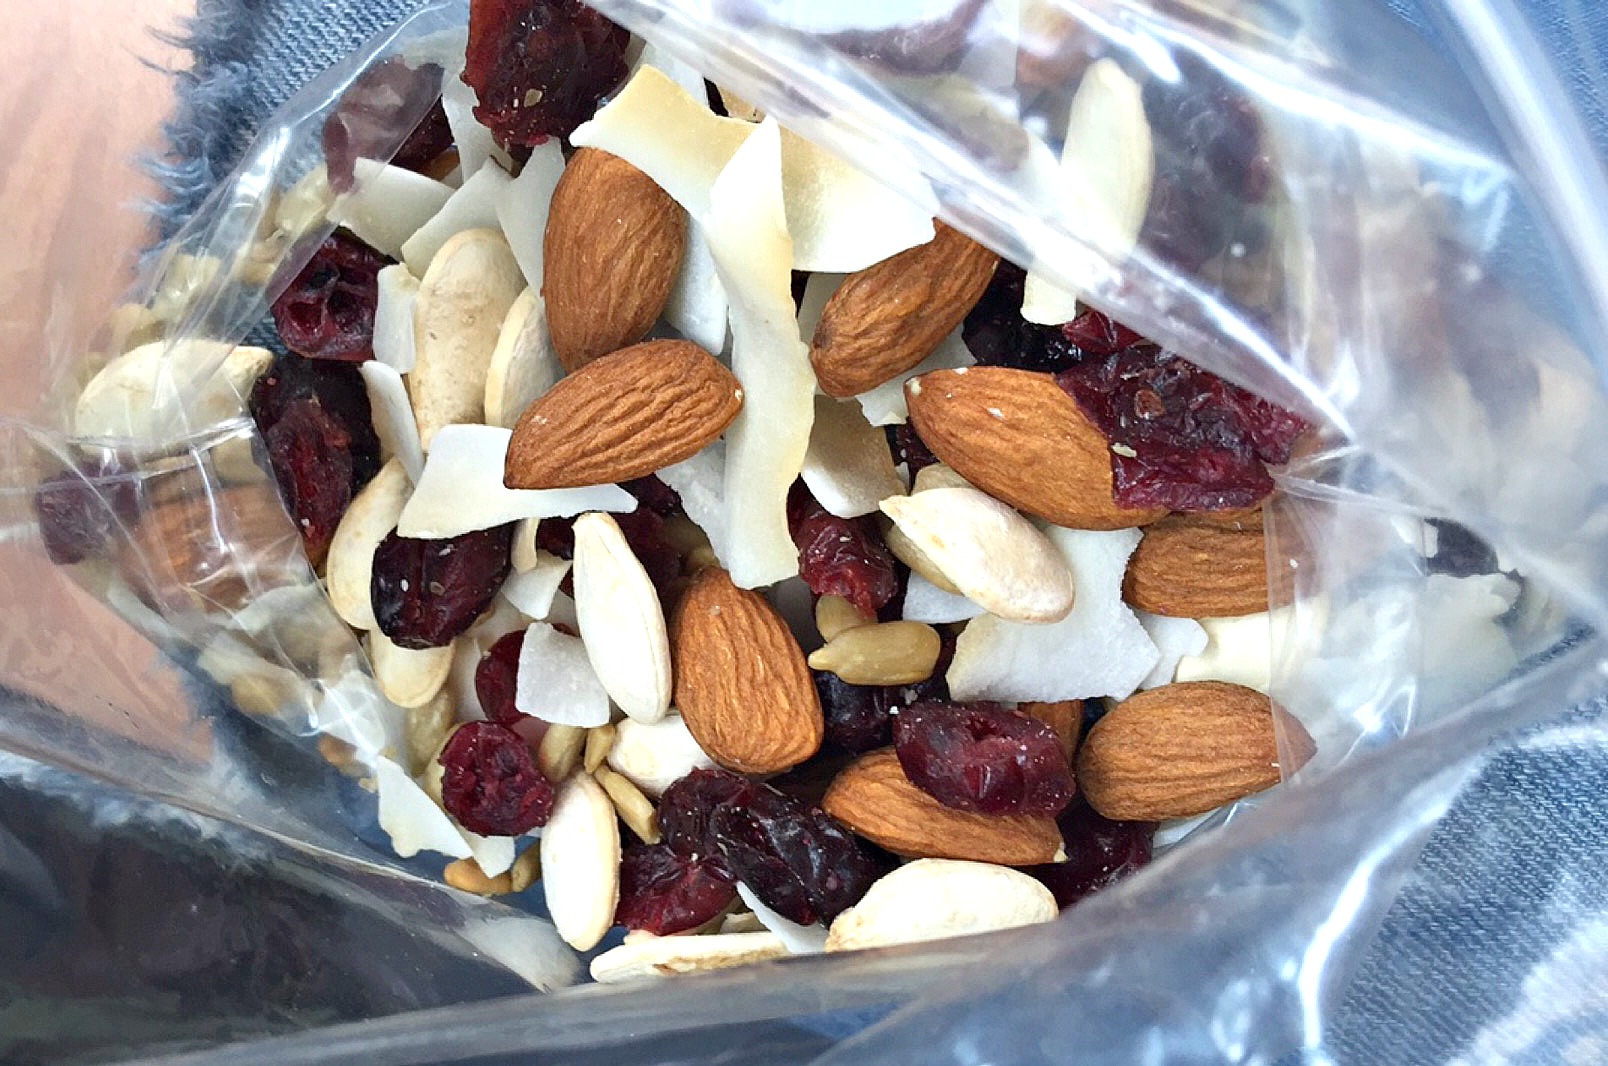 I made a little snack mix that had almonds, cranberries, sunflower seeds, toasted unsweetened coconut, pumpkin seeds and walnuts.